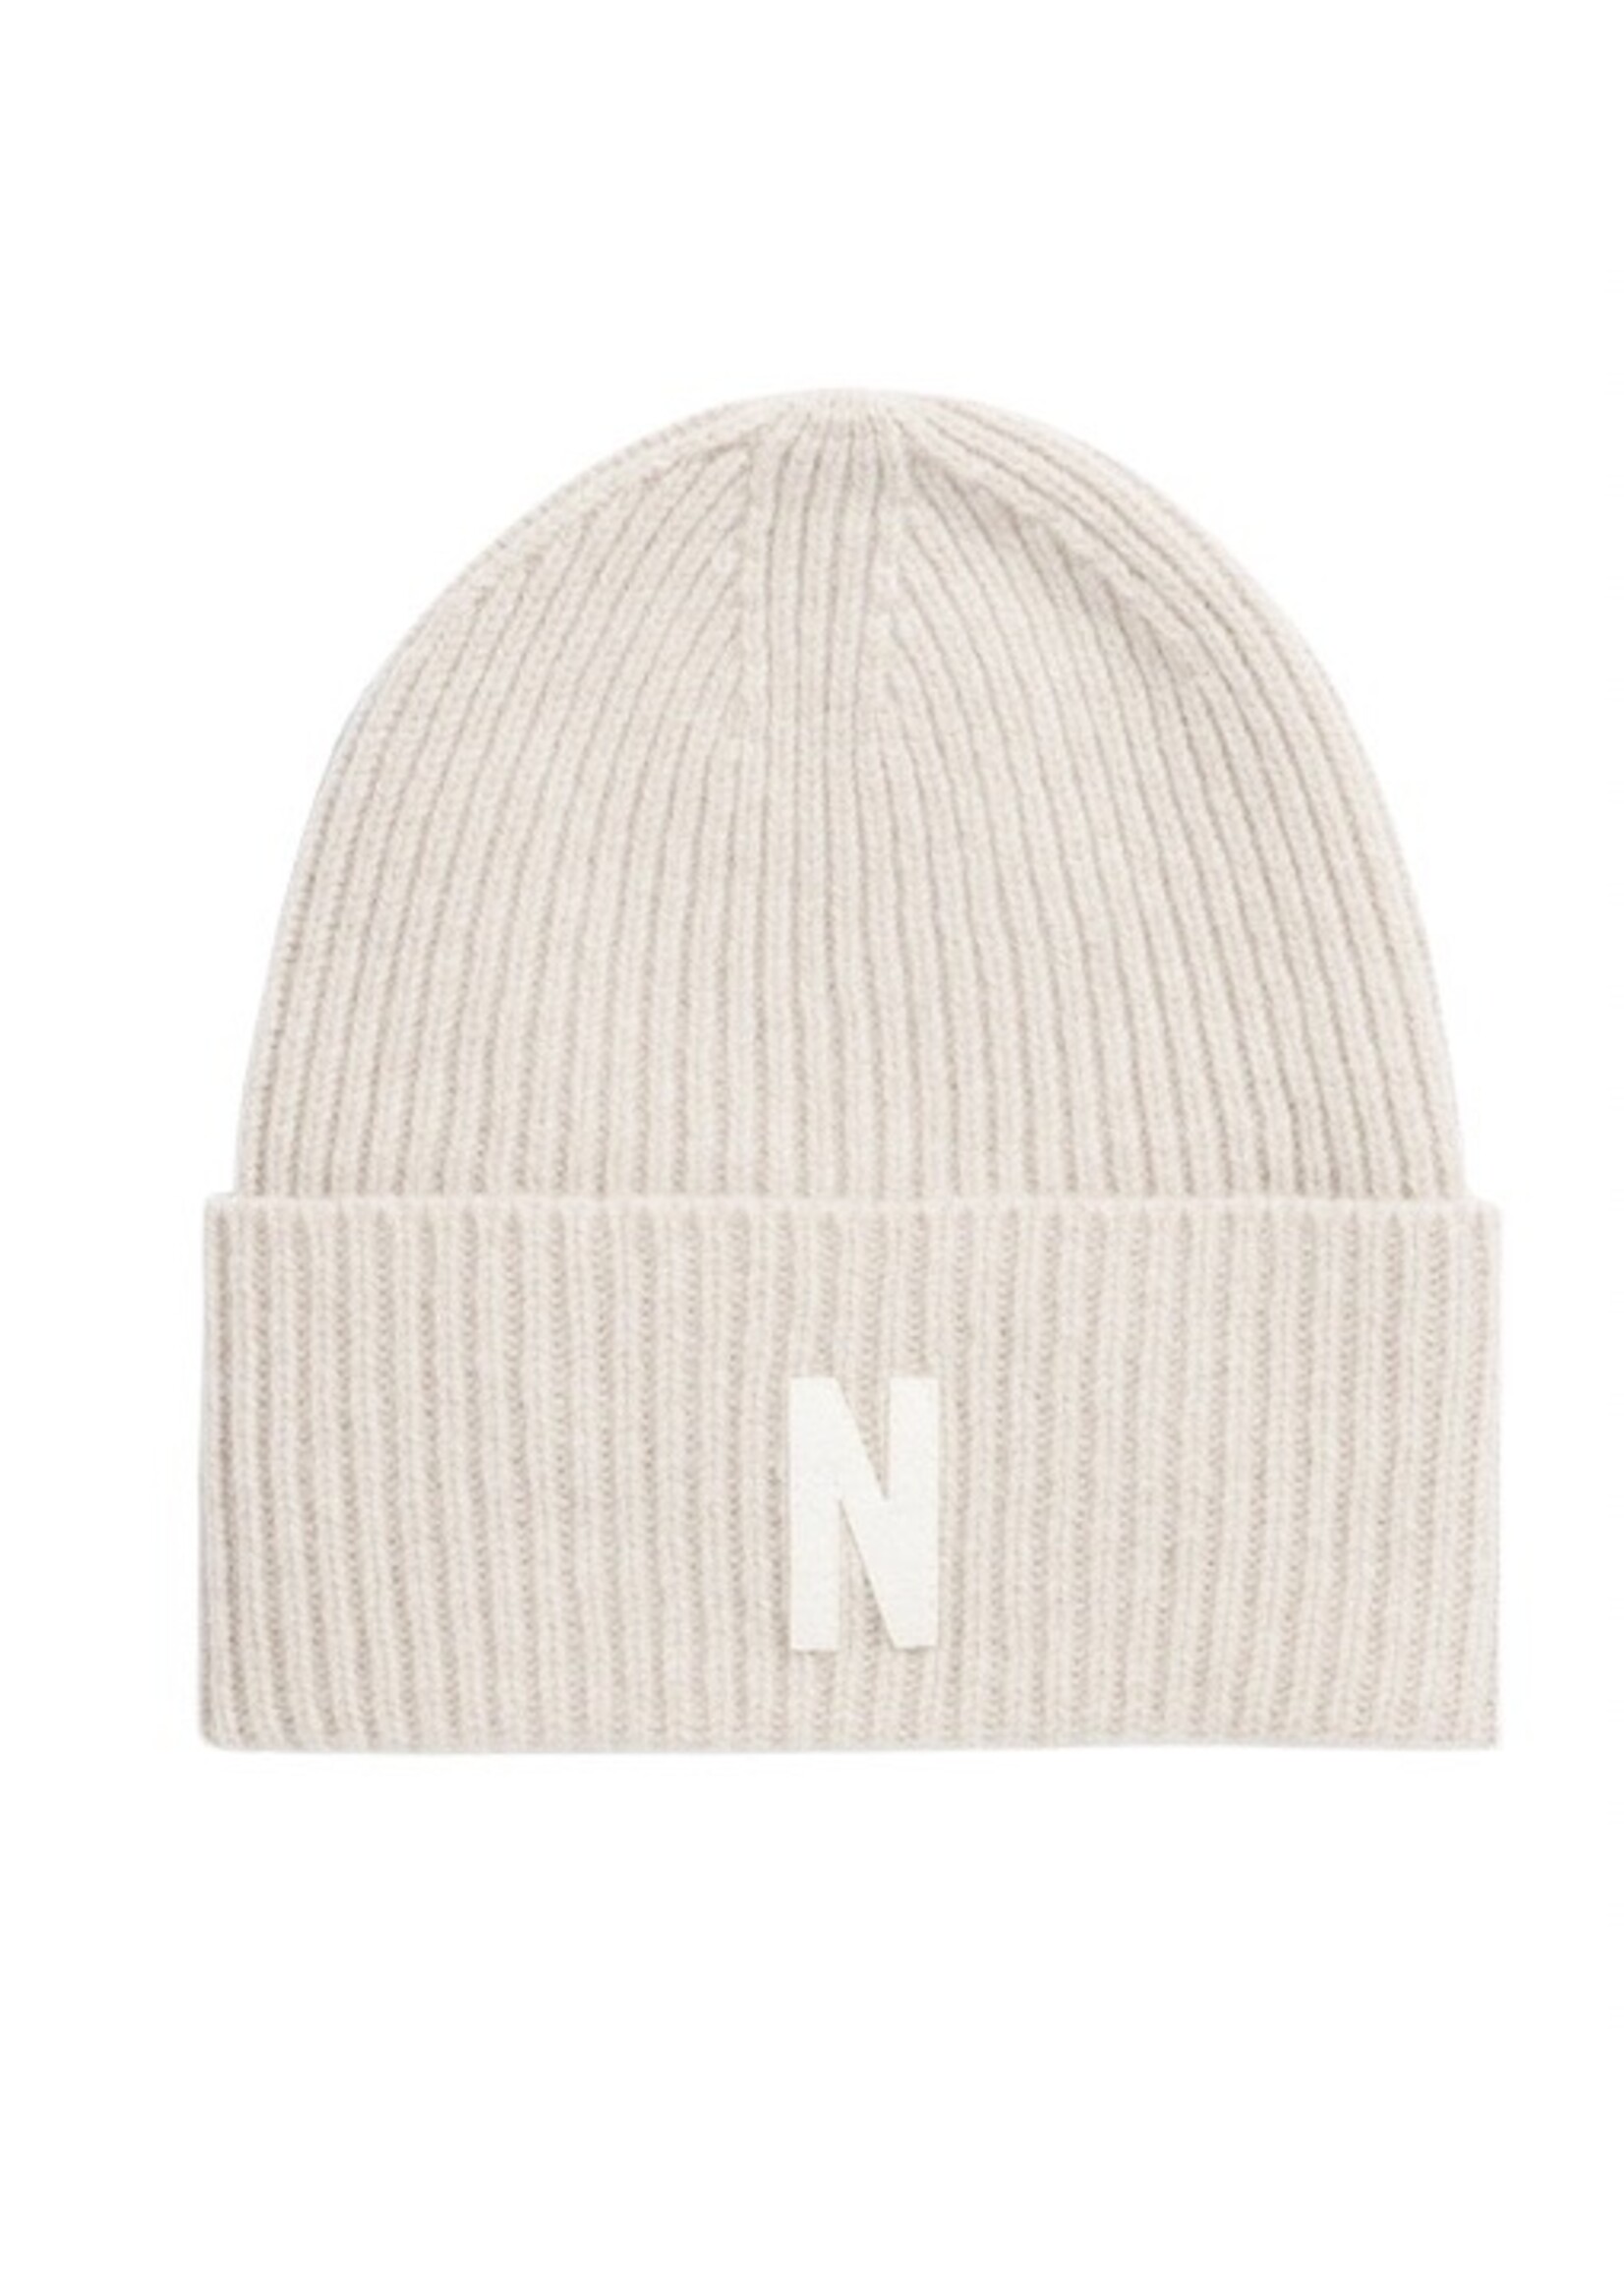 NORSE PROJECTS LAMBSWOOL BEANIE